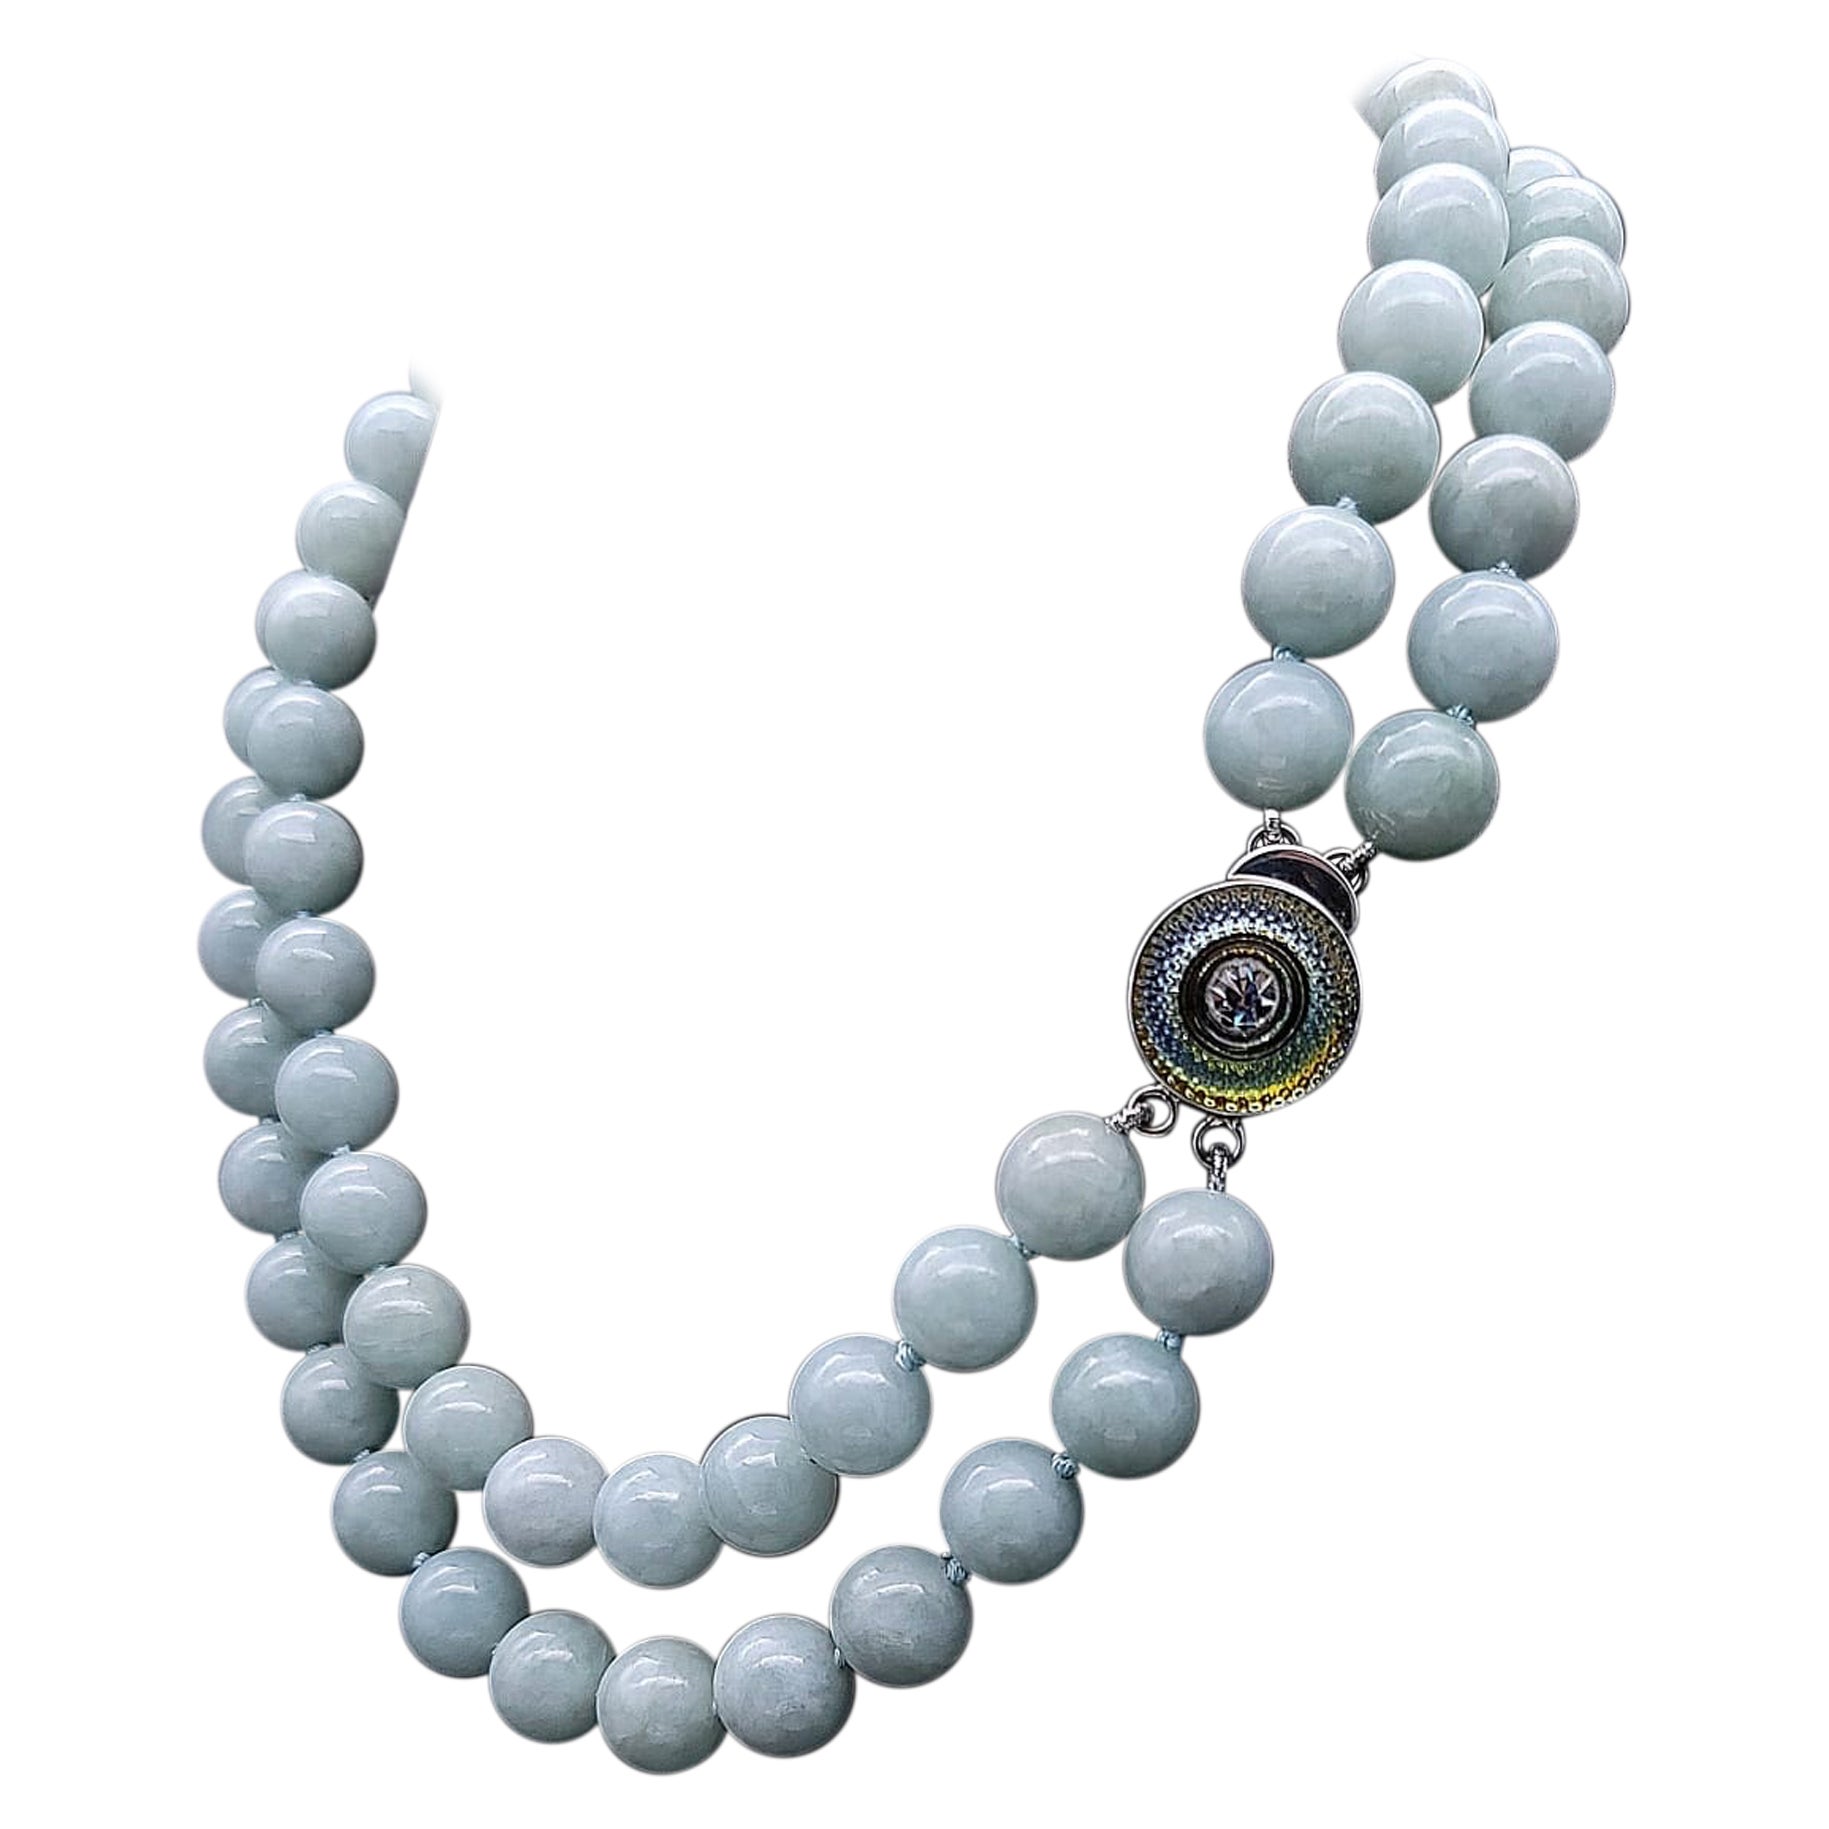 A.Jeschel Elegant matched Burma Jade necklace with a signature clasp. For Sale